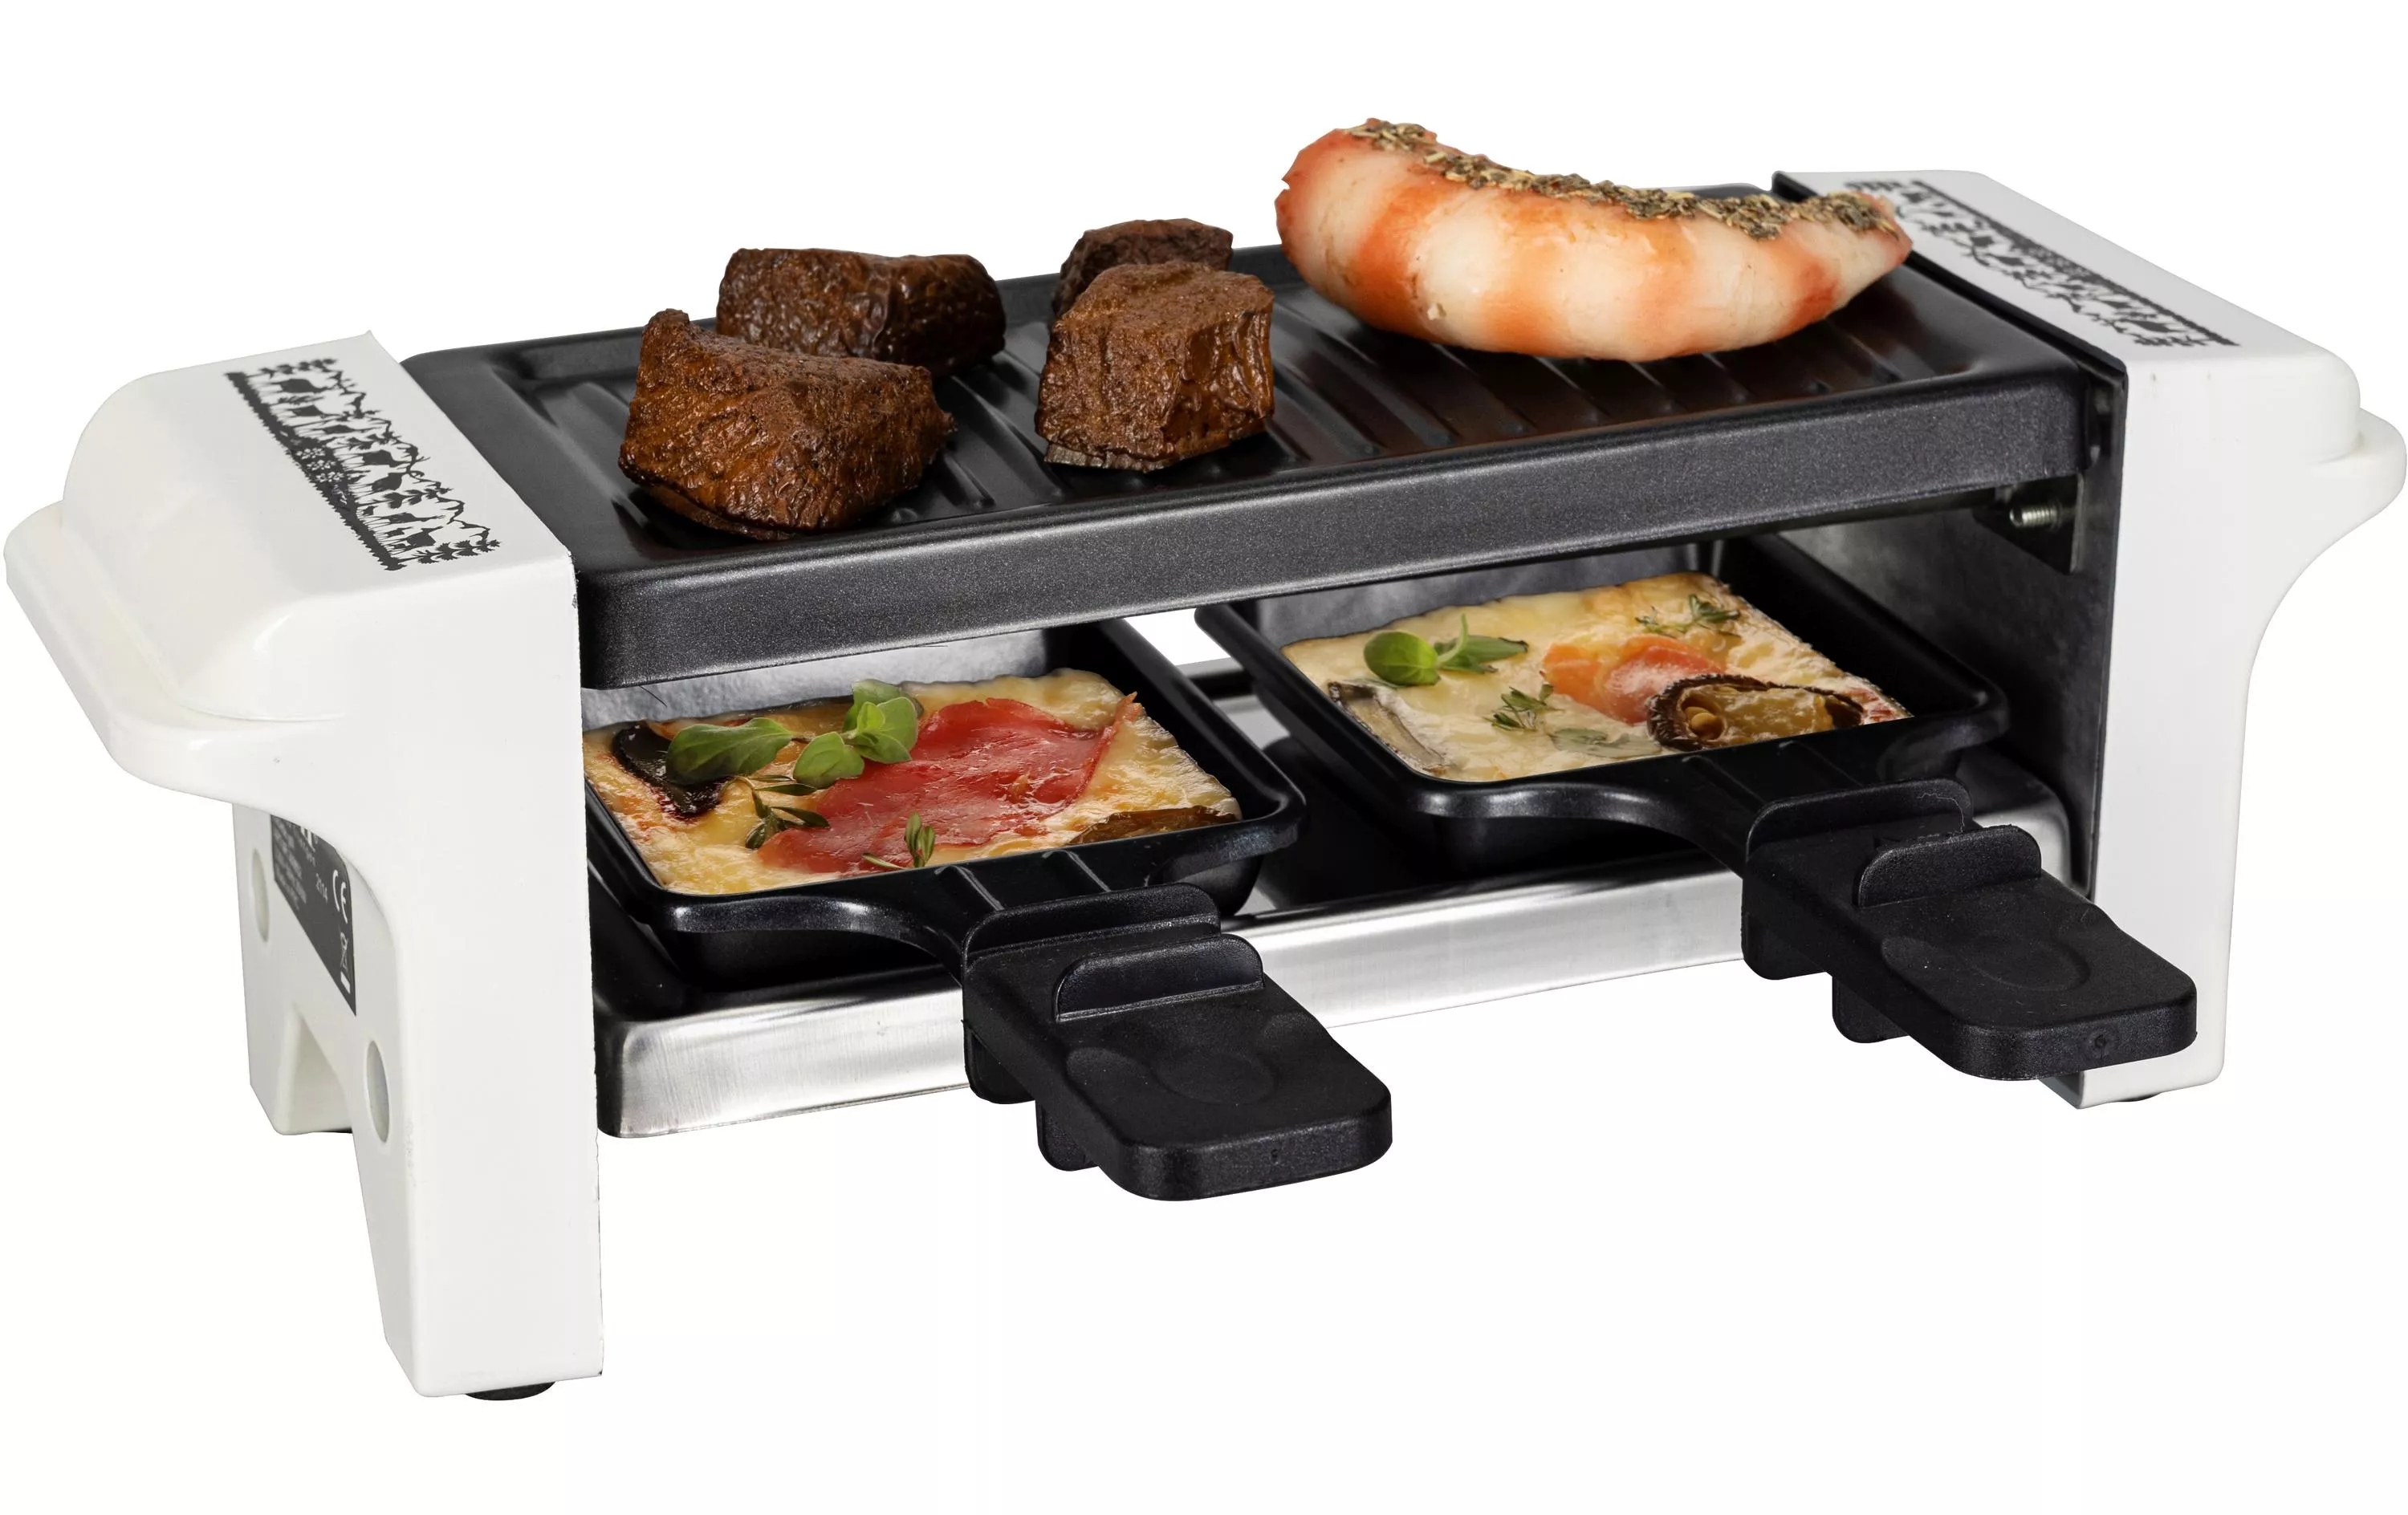 Raclette Forno Silhouette Bianco 2 persone - Raclette